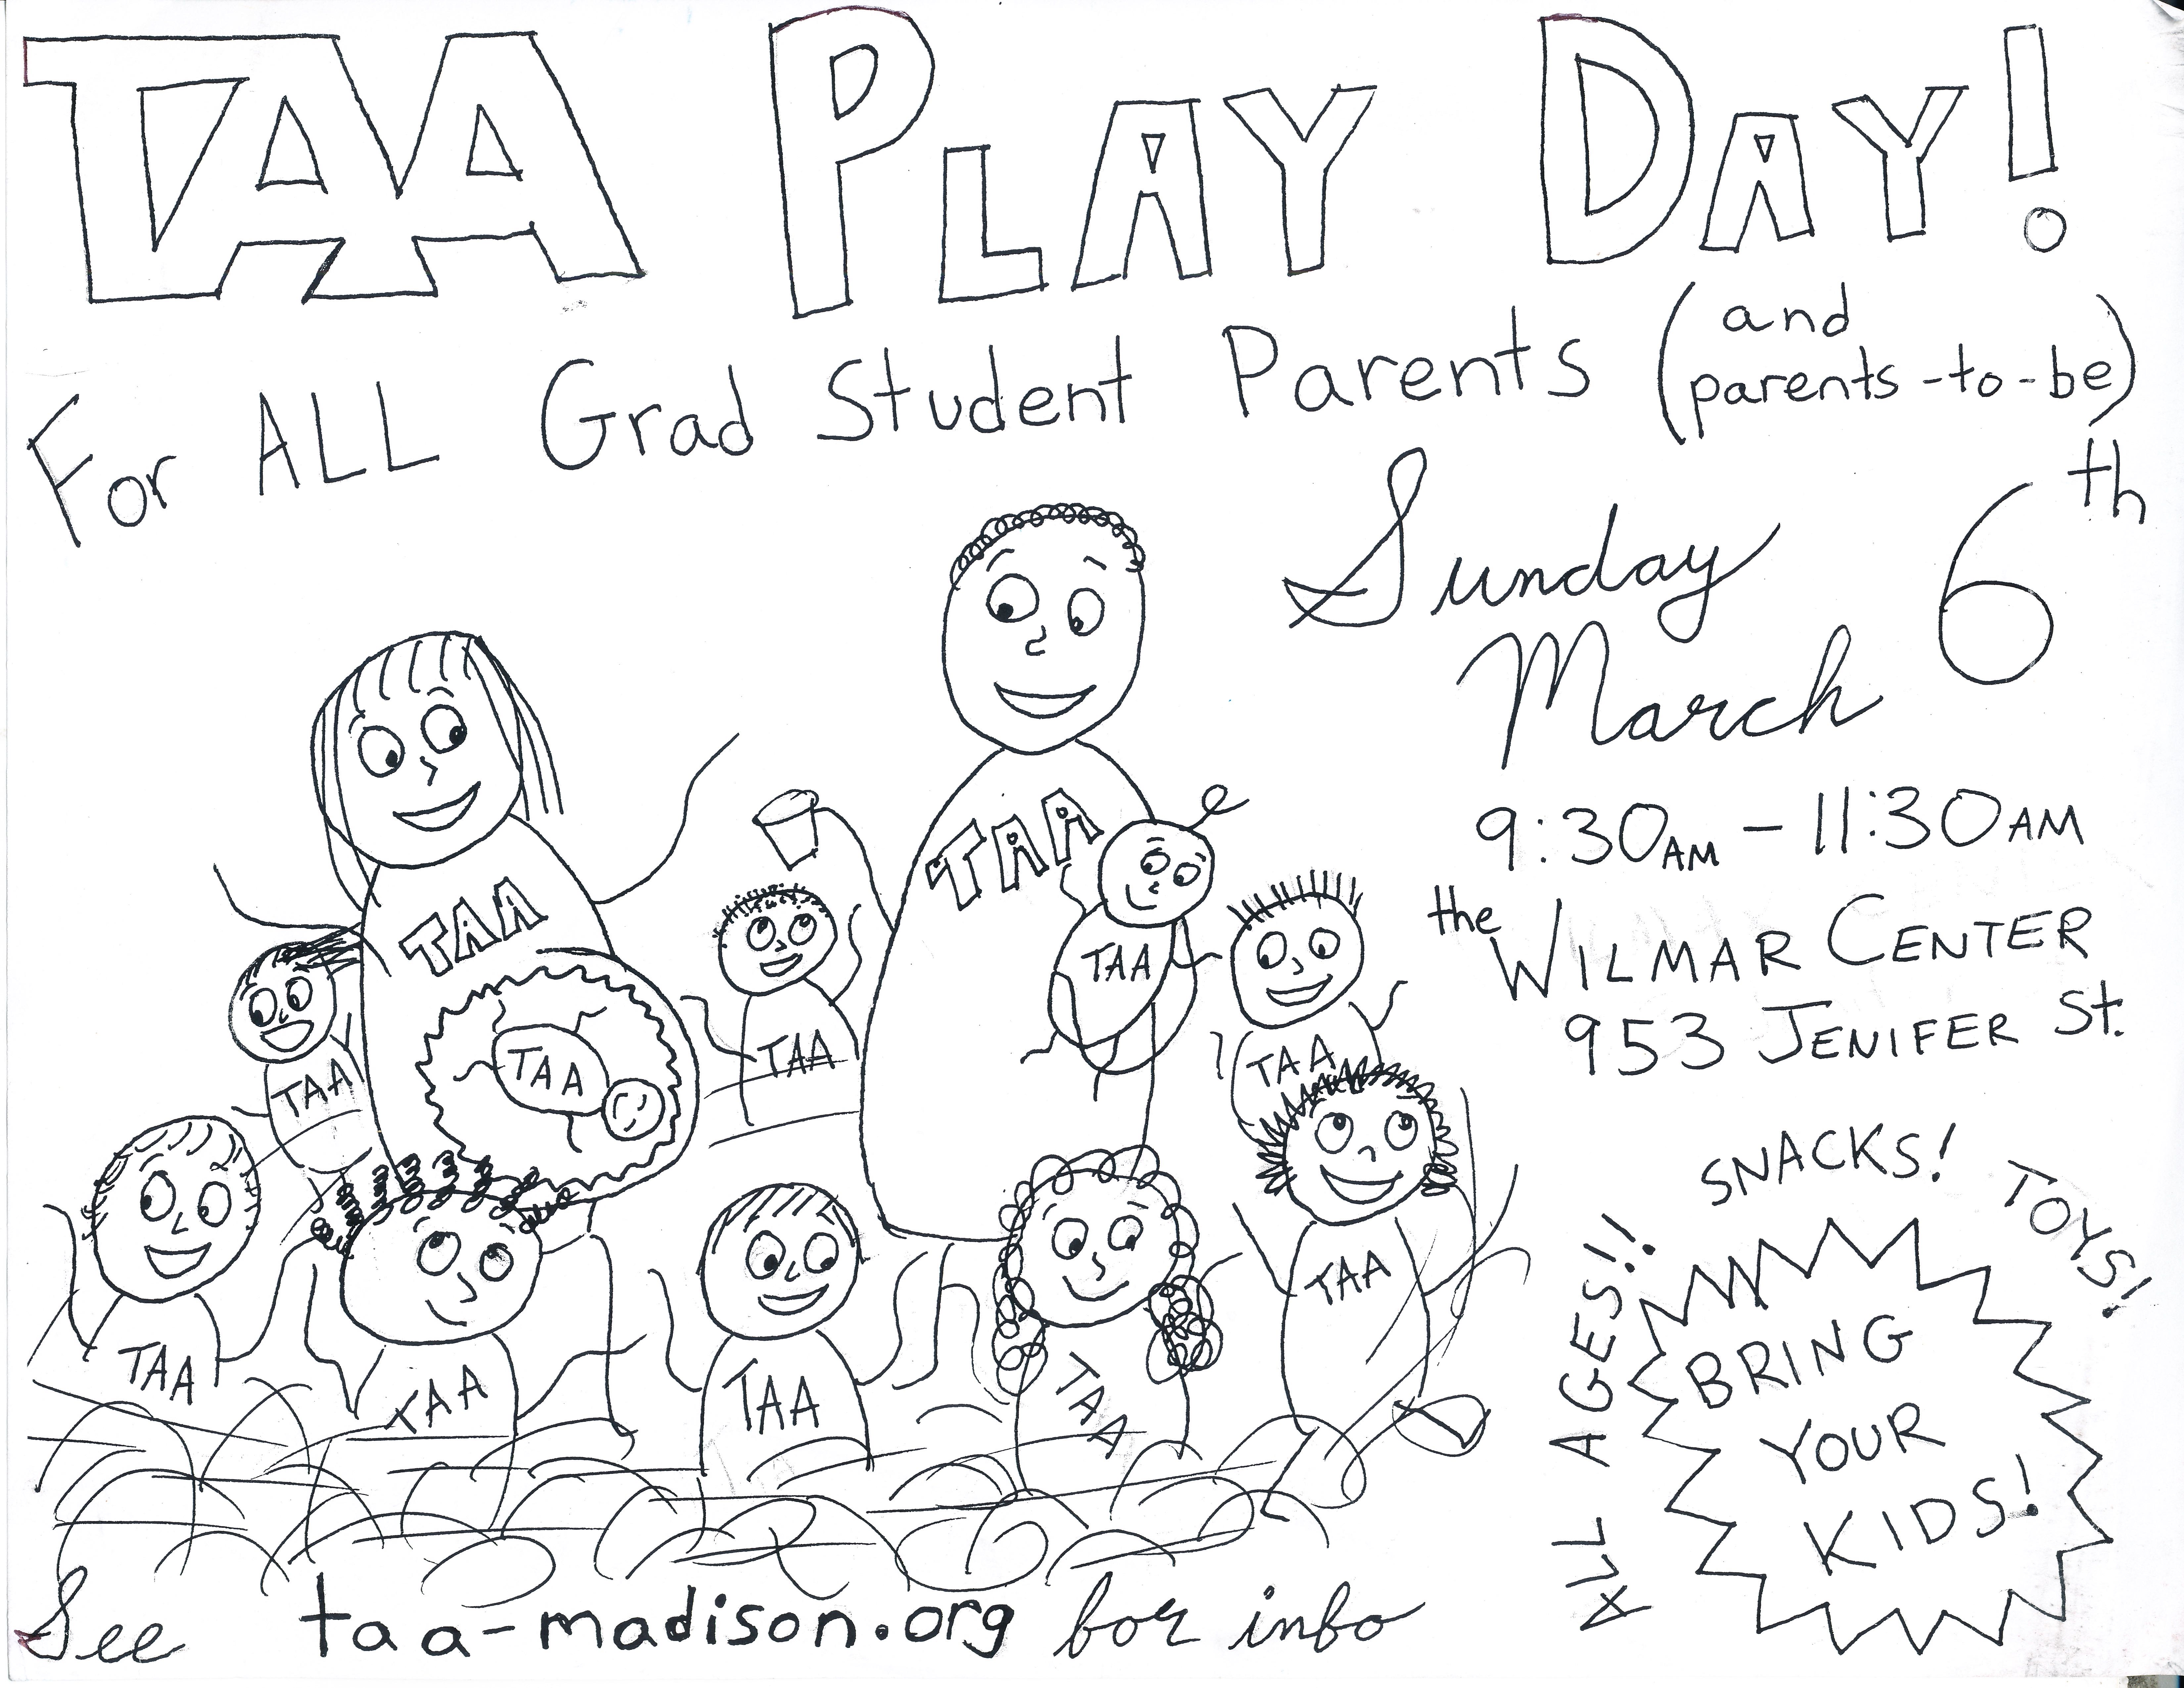 Bring Your Kids to TAA Play Day (March 6)